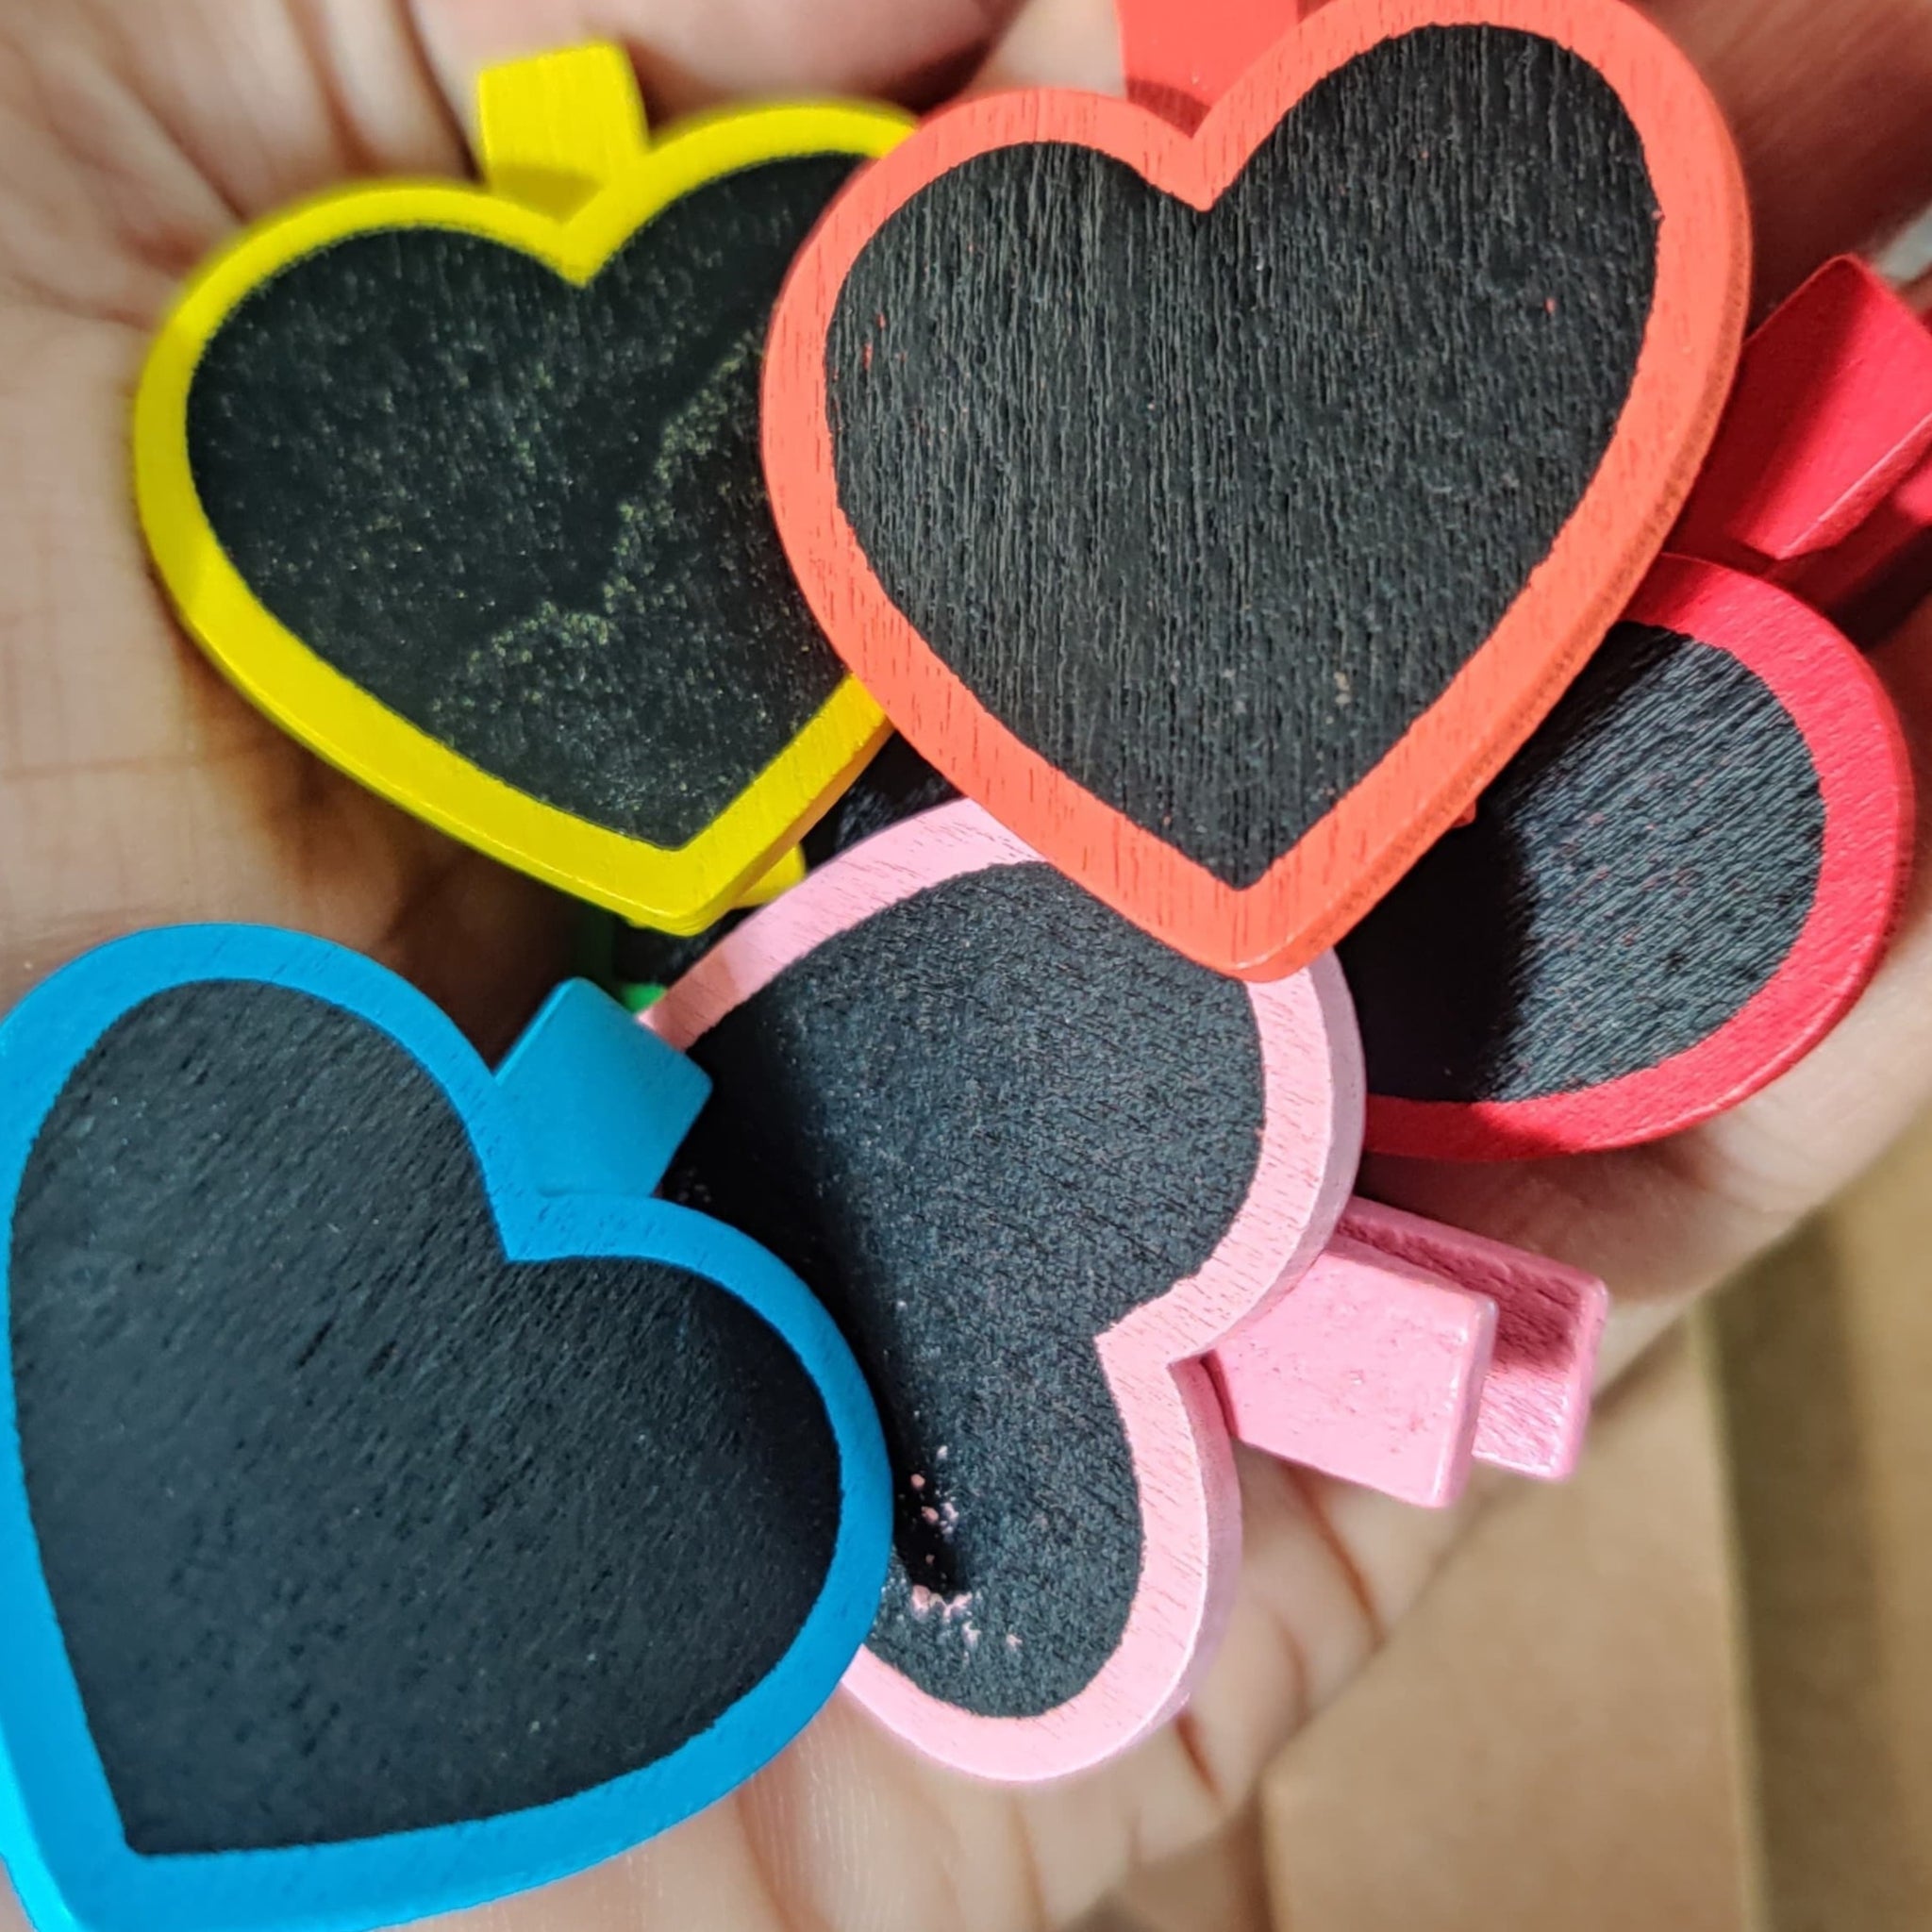 Puneet Gifts White Boards & Black Boards Heart shaped Mini Colorful Black Board with Clip 6pcs - Perfect for Notes and Reminders